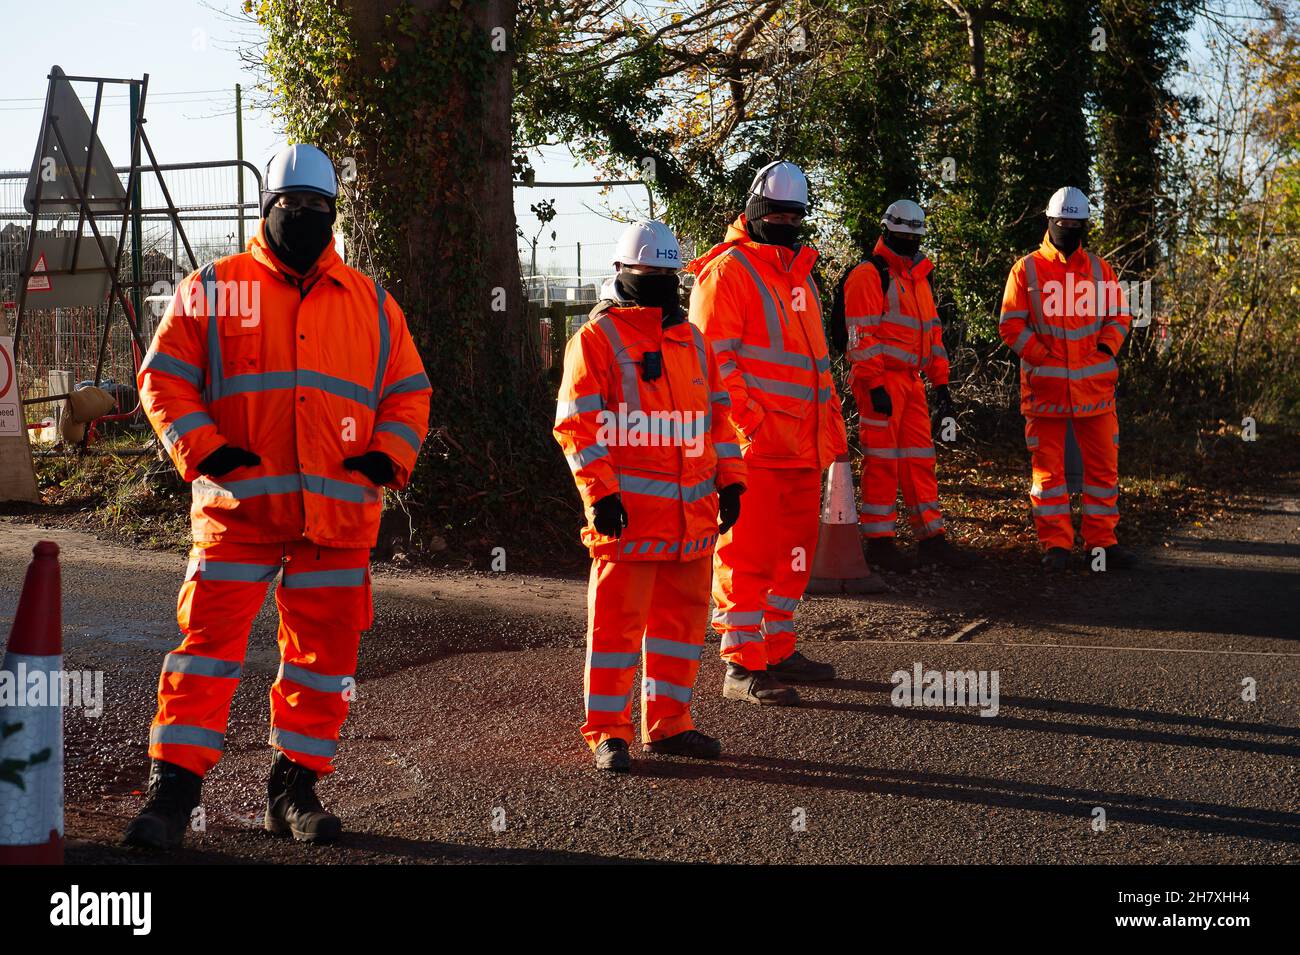 Aylesbury, Buckinghamshire, UK. 25th November, 2021. HS2 Security Guards outside their compound. Anti HS2 protesters were protesting along the Oxford Road today in Aylesbury about HS2 allegedly committing wildlife crimes as HS2 have felled mature trees that they believe had hibernating bats roosting in them. Although the Eastern Leg of the HS2 High Speed Rail has been cancelled by Boris Johnson, HS2 Ltd are continuing with their construction of Phase 1 of the HS2 High Speed Rail from London to Birmingham which is destroying swathes of the Chilterns, an Area of Outstanding Natural Beauty. Credi Stock Photo